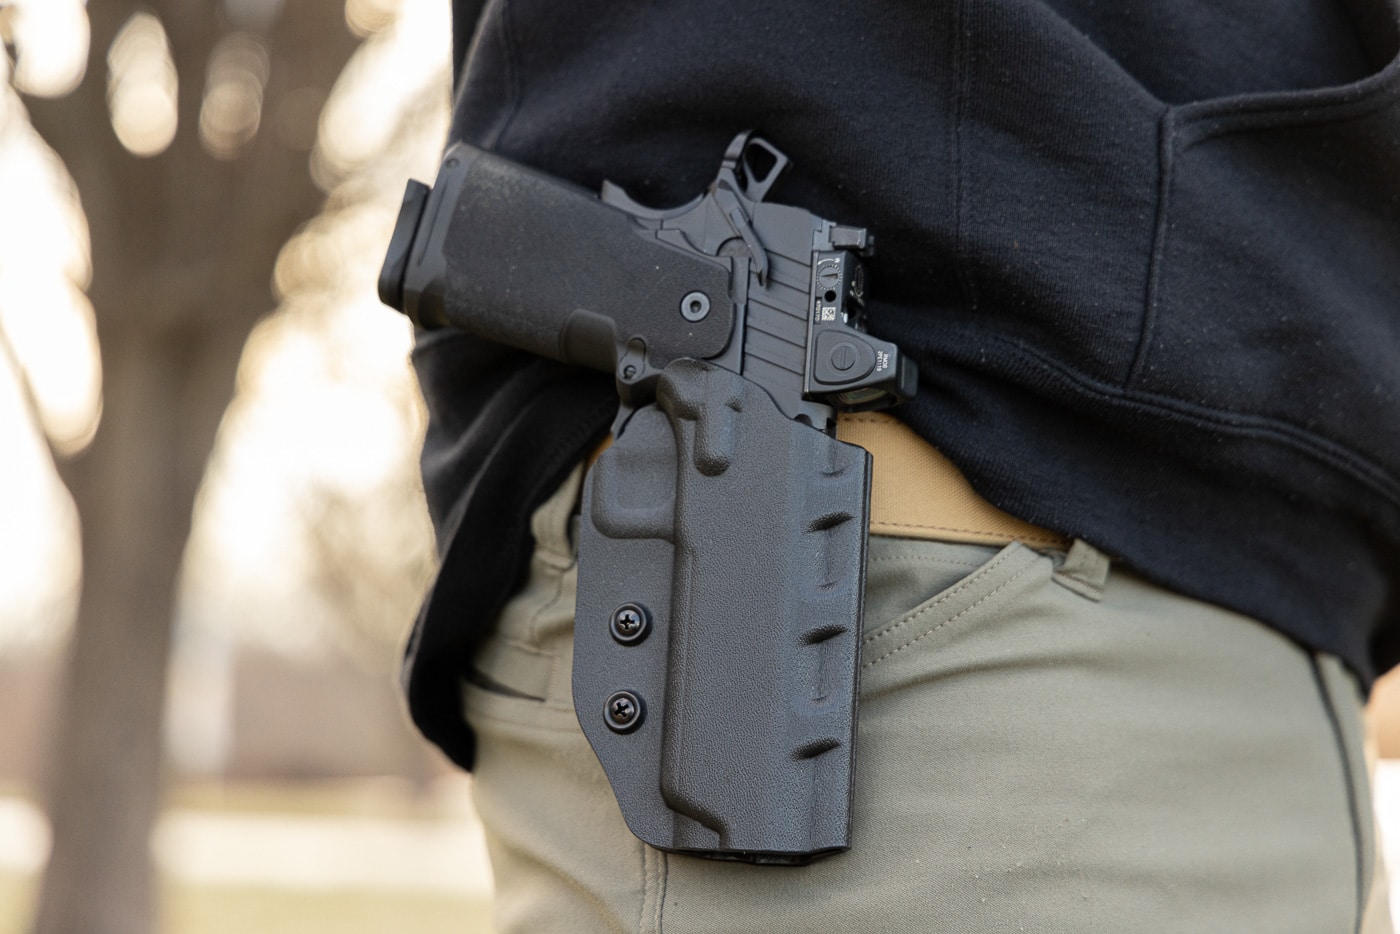 wearing the cazzuto holster